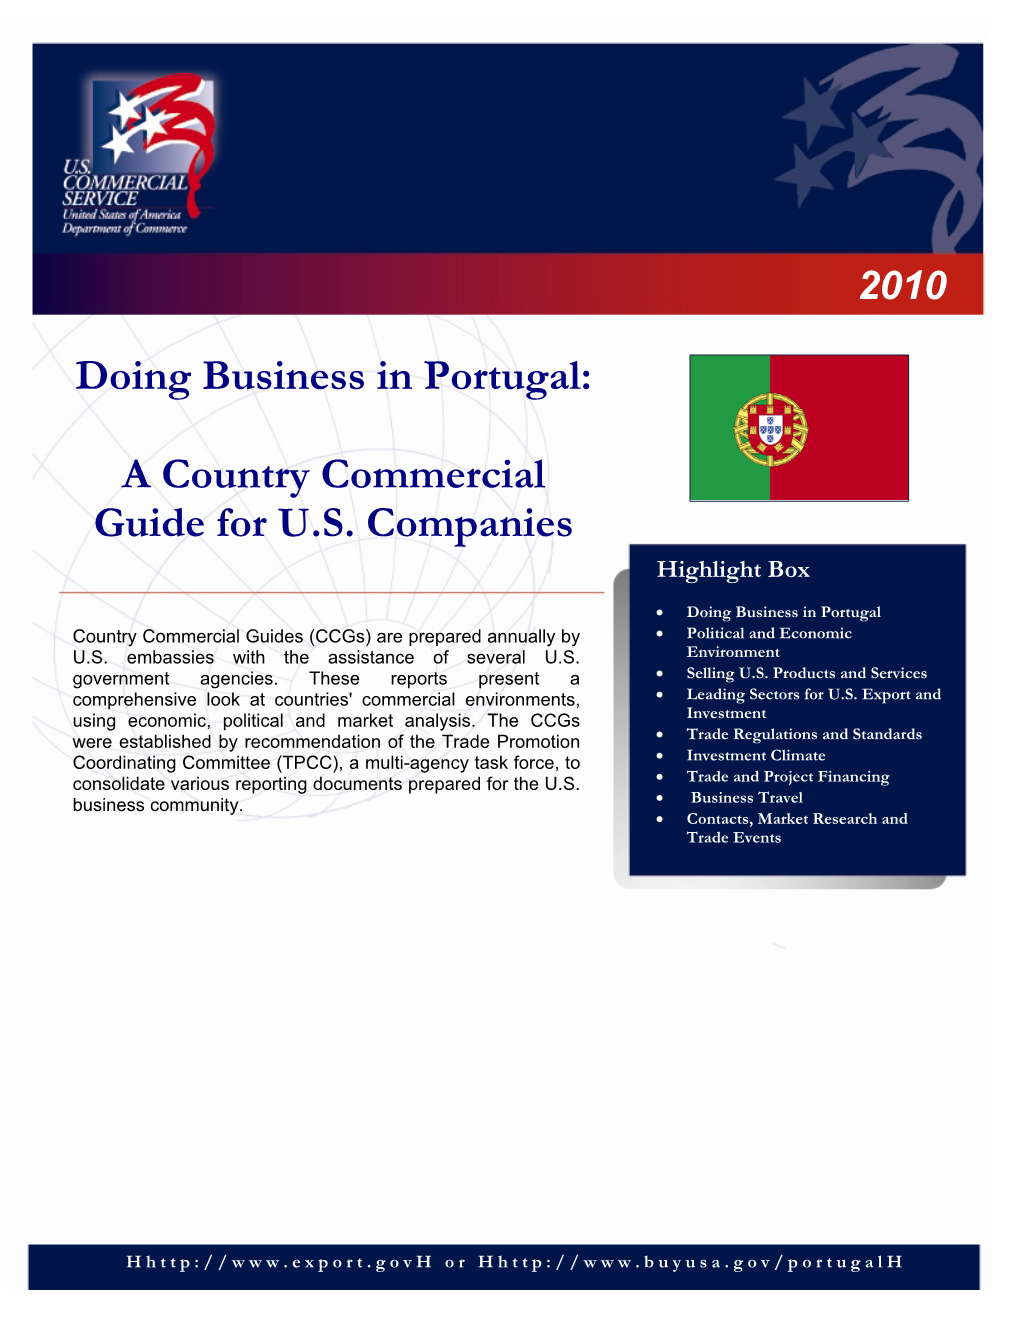 Doing Business in Portugal